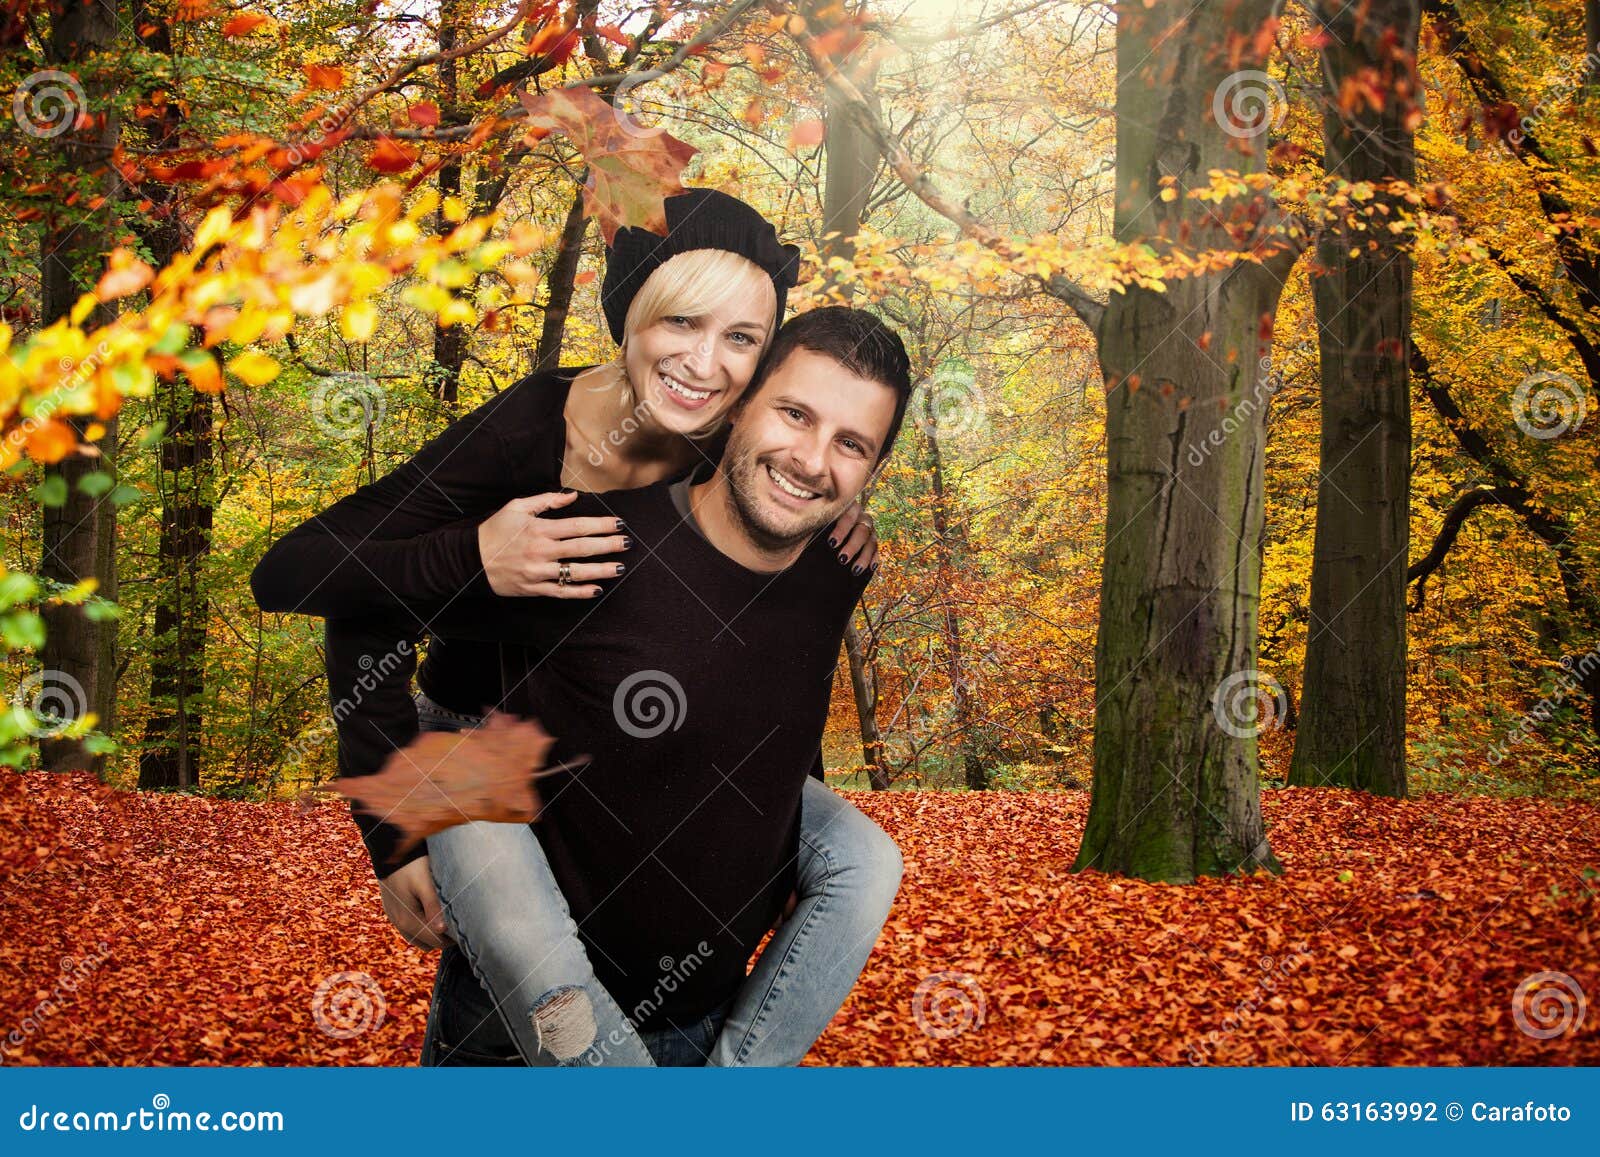 happy couples in autumn forest